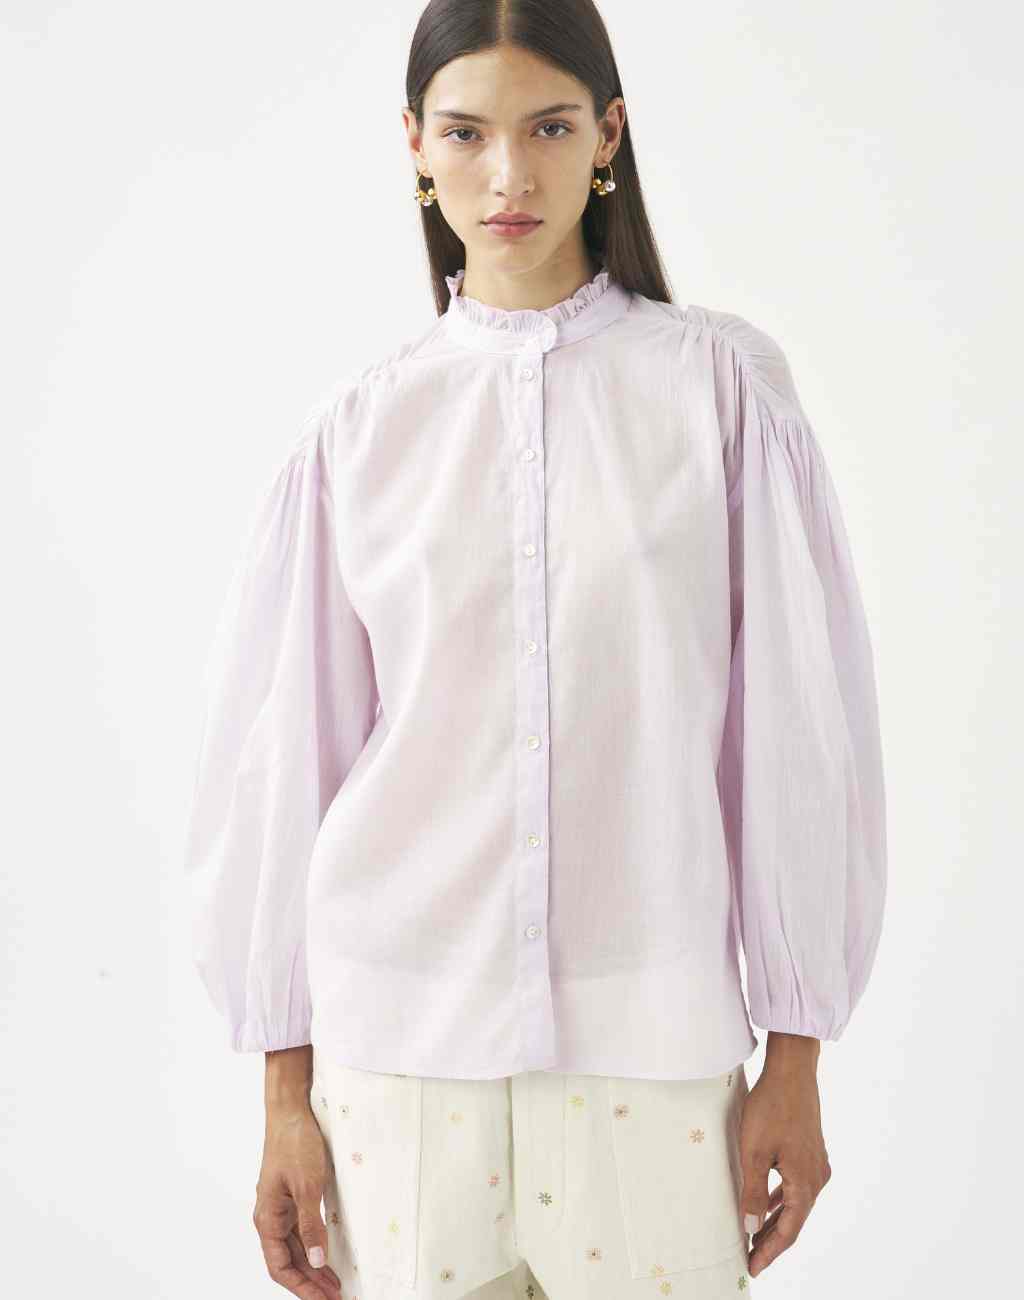 Cotton Voile Lightweight Anna Blouse in Lilac with Shoulder Pleats, Ruffled Collar, and Balloon Sleeves